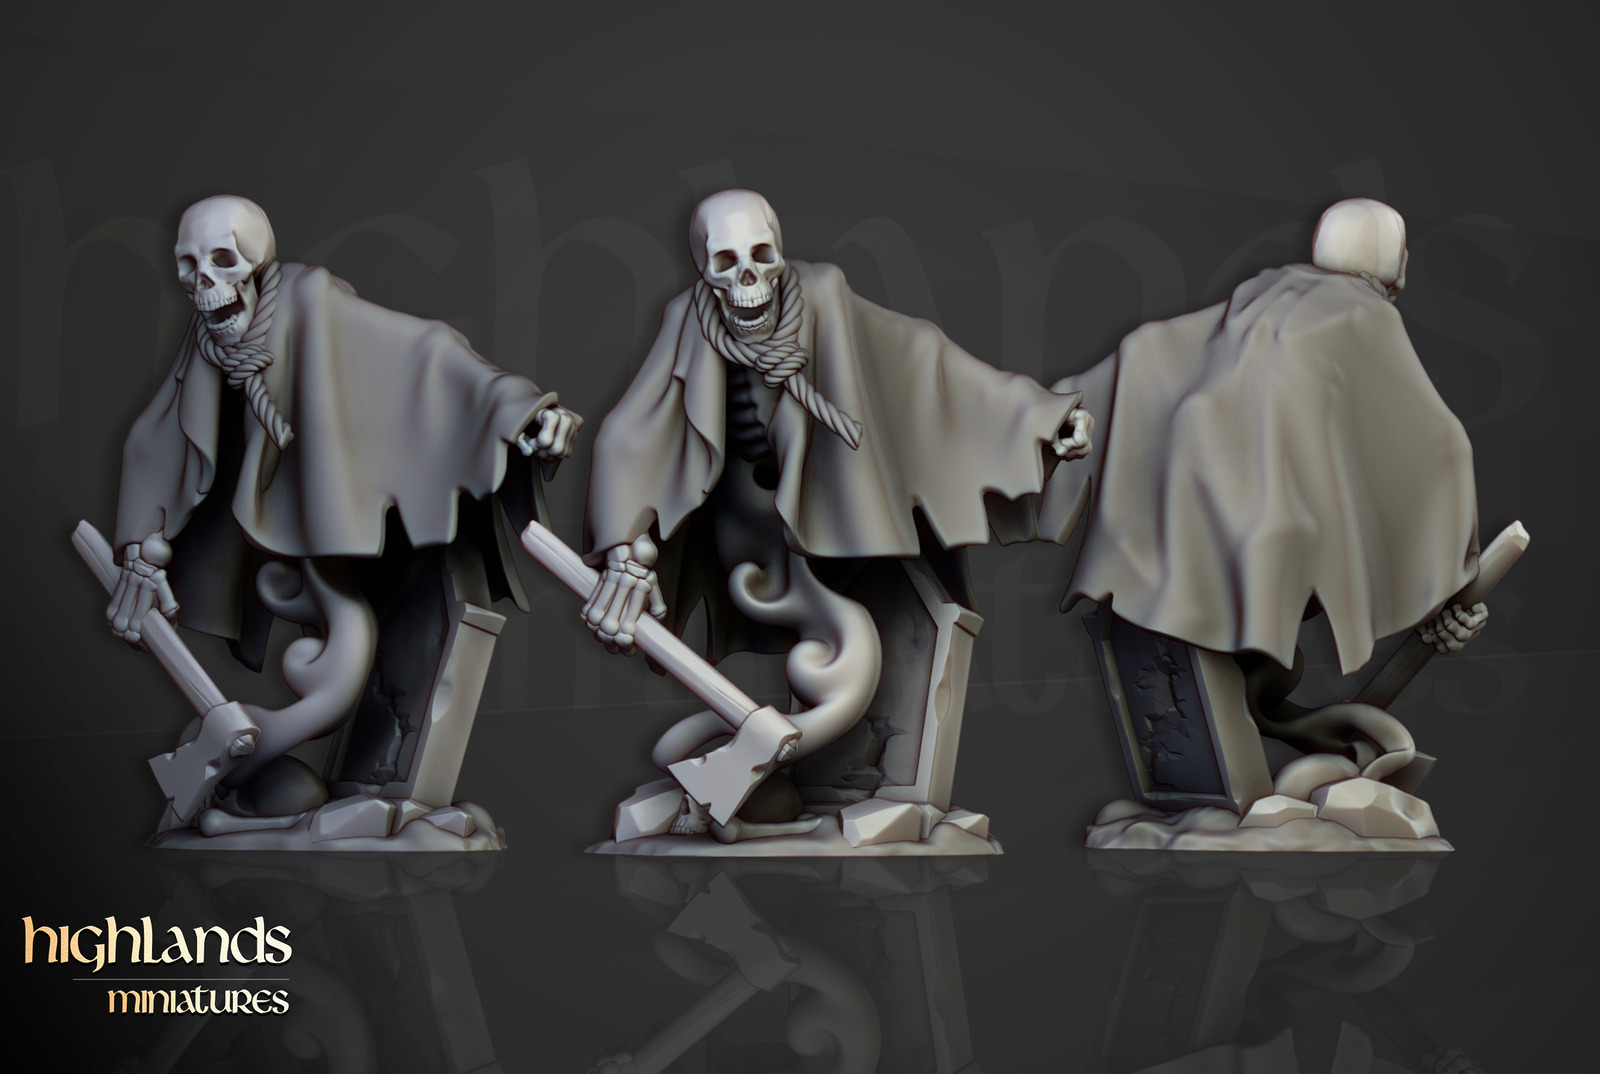 Undead Miniatures designed by Highlands miniatures for Tabletop Wargaming